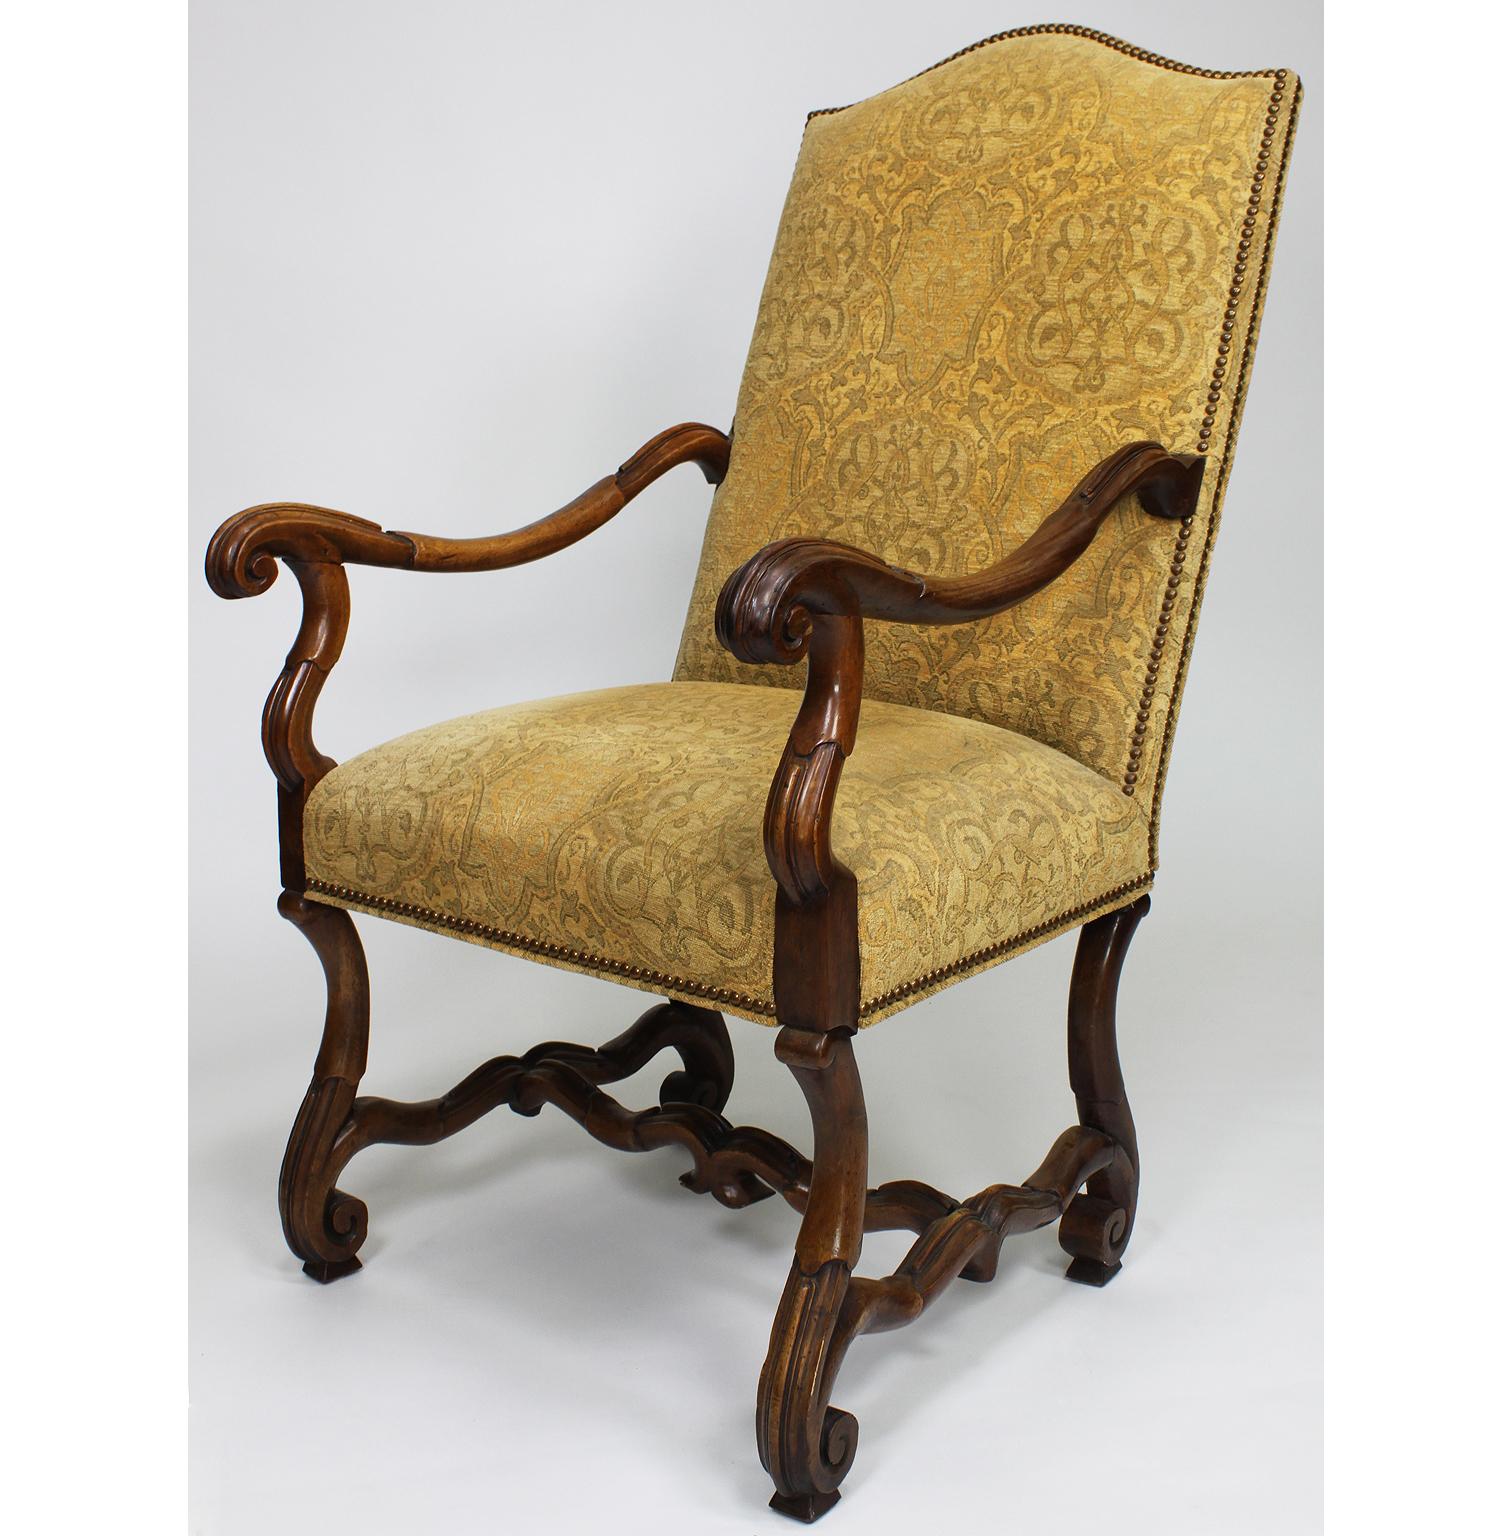 A fine pair of Italian 19th century Baroque Revival style carved walnut throne armchairs. The high-back frames with recent upholstered back and seat and open carved scrolled armrests raised on four conjoined cabriolet carved legs. The fabric is